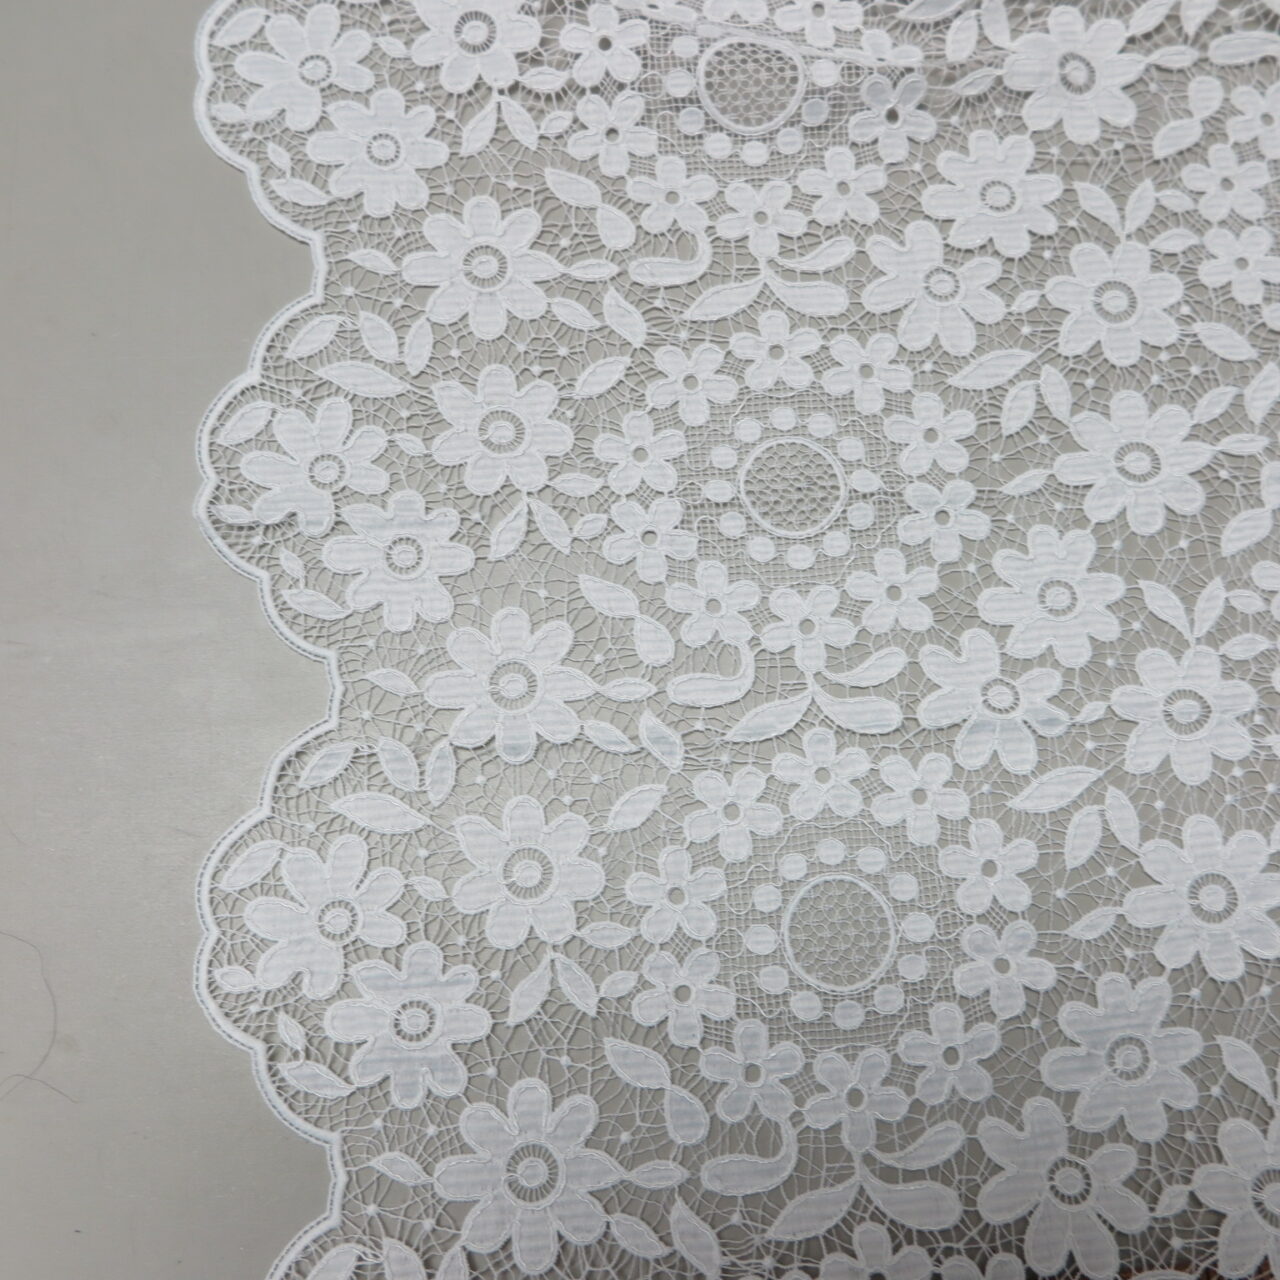 natural cotton lace fabric, 100% cotton lace fabric, cotton guipure lace  fabric, vintage style lace, retro lace fabric with circles